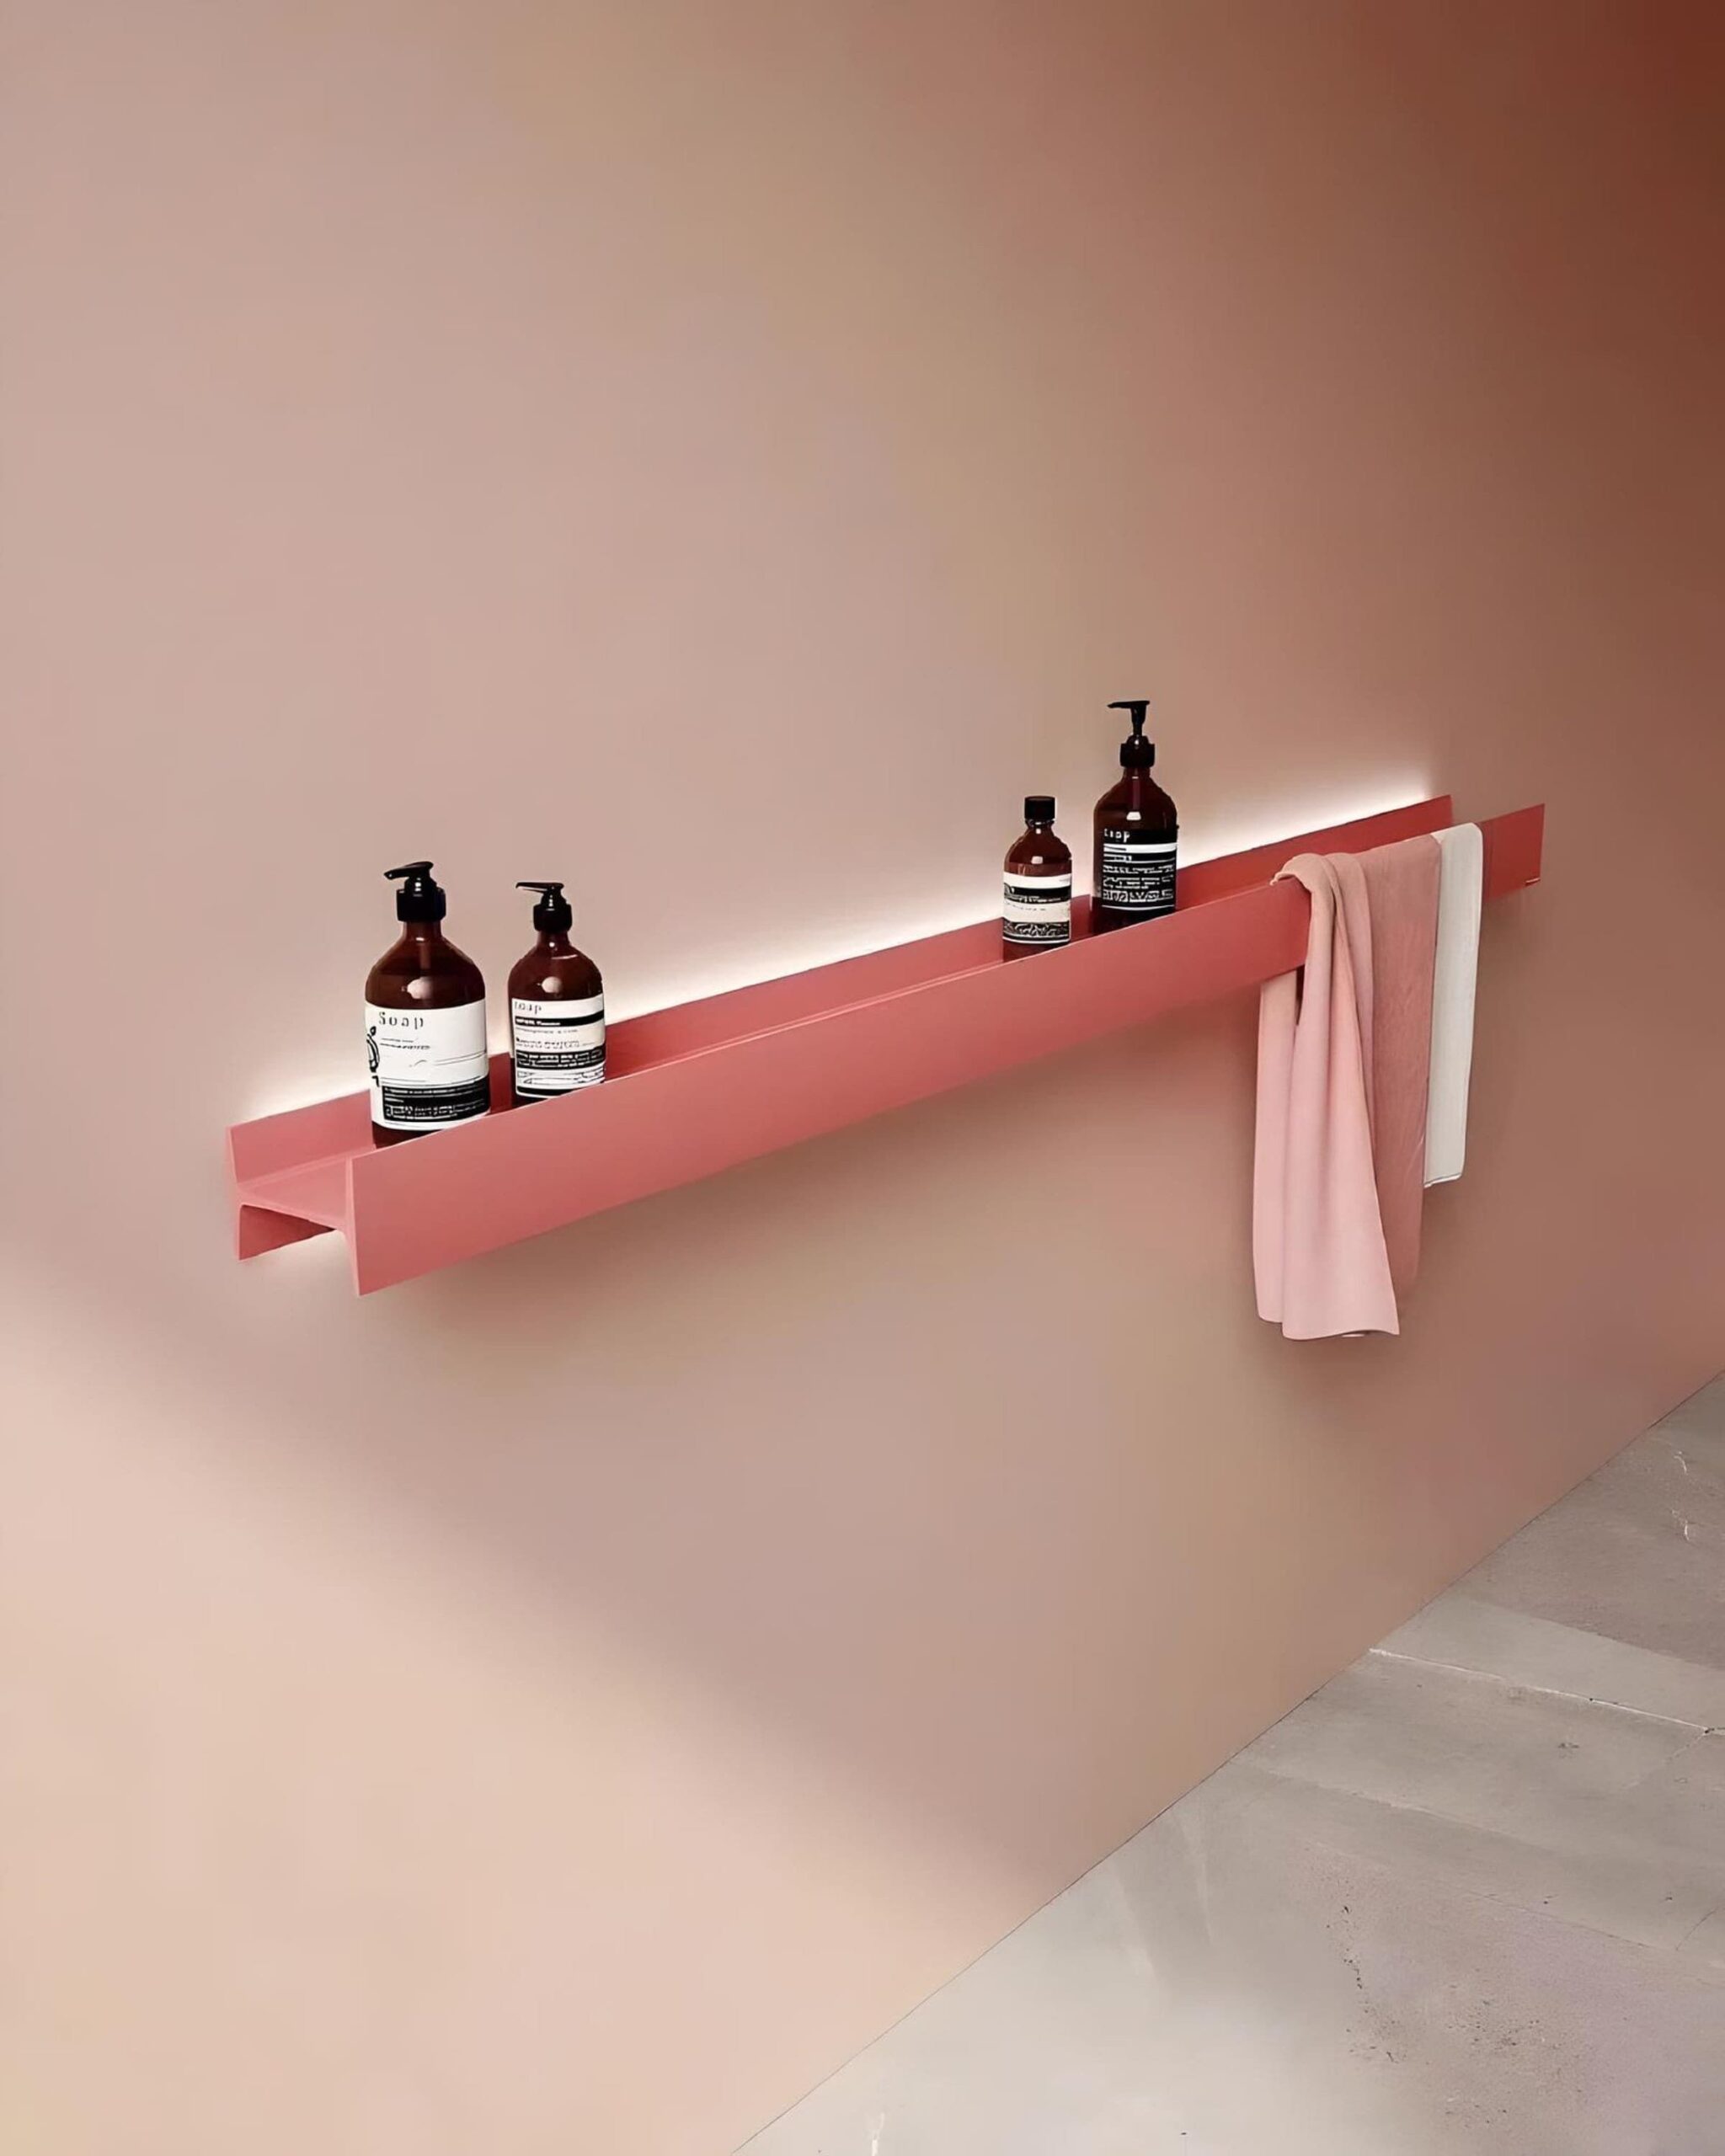 Transform Your Bathroom with Chic and Functional Modern Bathroom Accessories